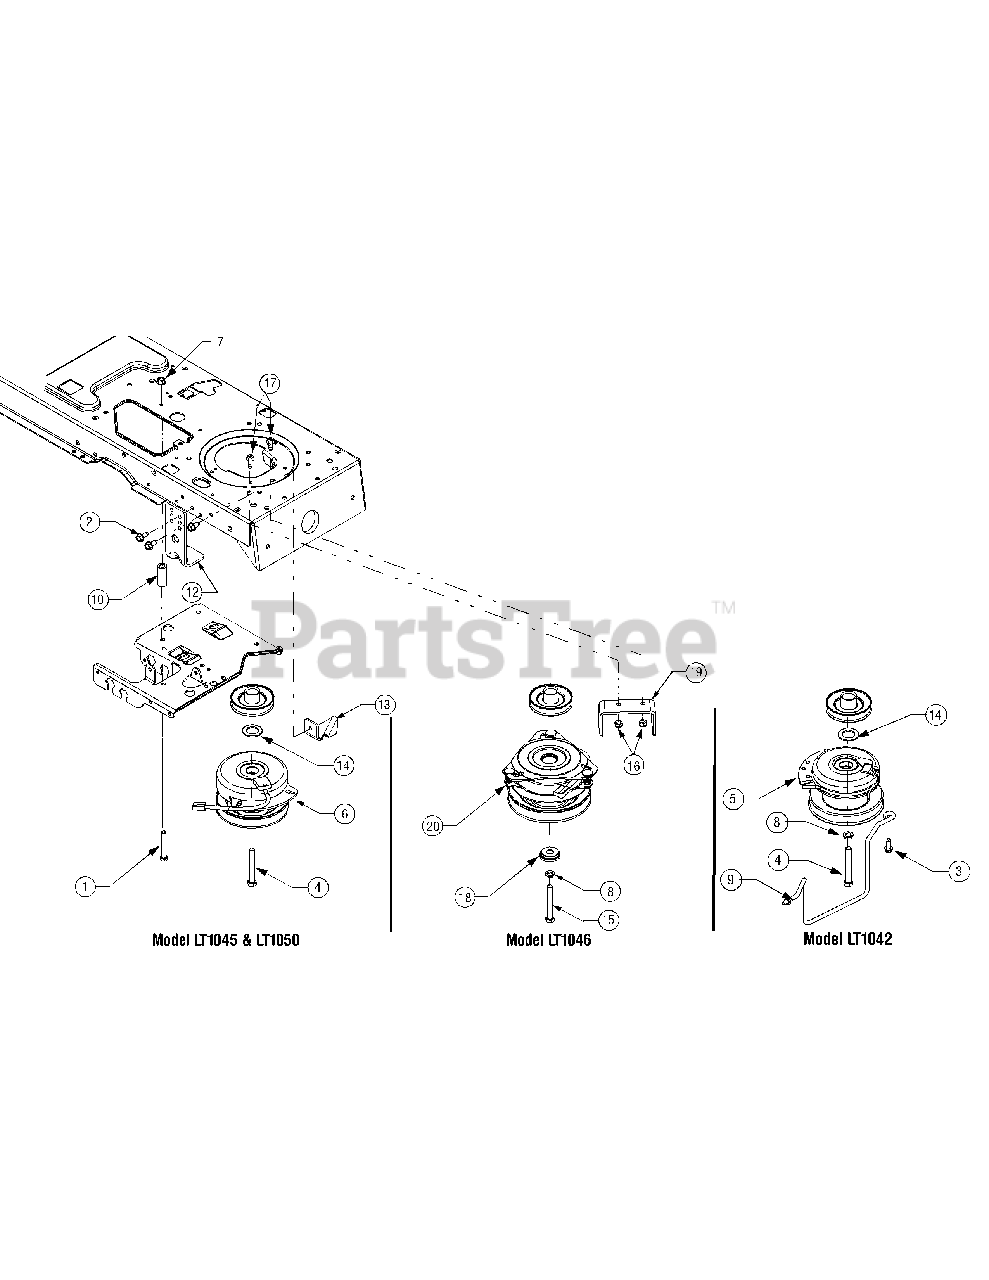 Cub Cadet Lt 1042 13ax11cg710 Cub Cadet 42 Lawn Tractor 2007 Before Power Take Off System Parts Lookup With Diagrams Partstree